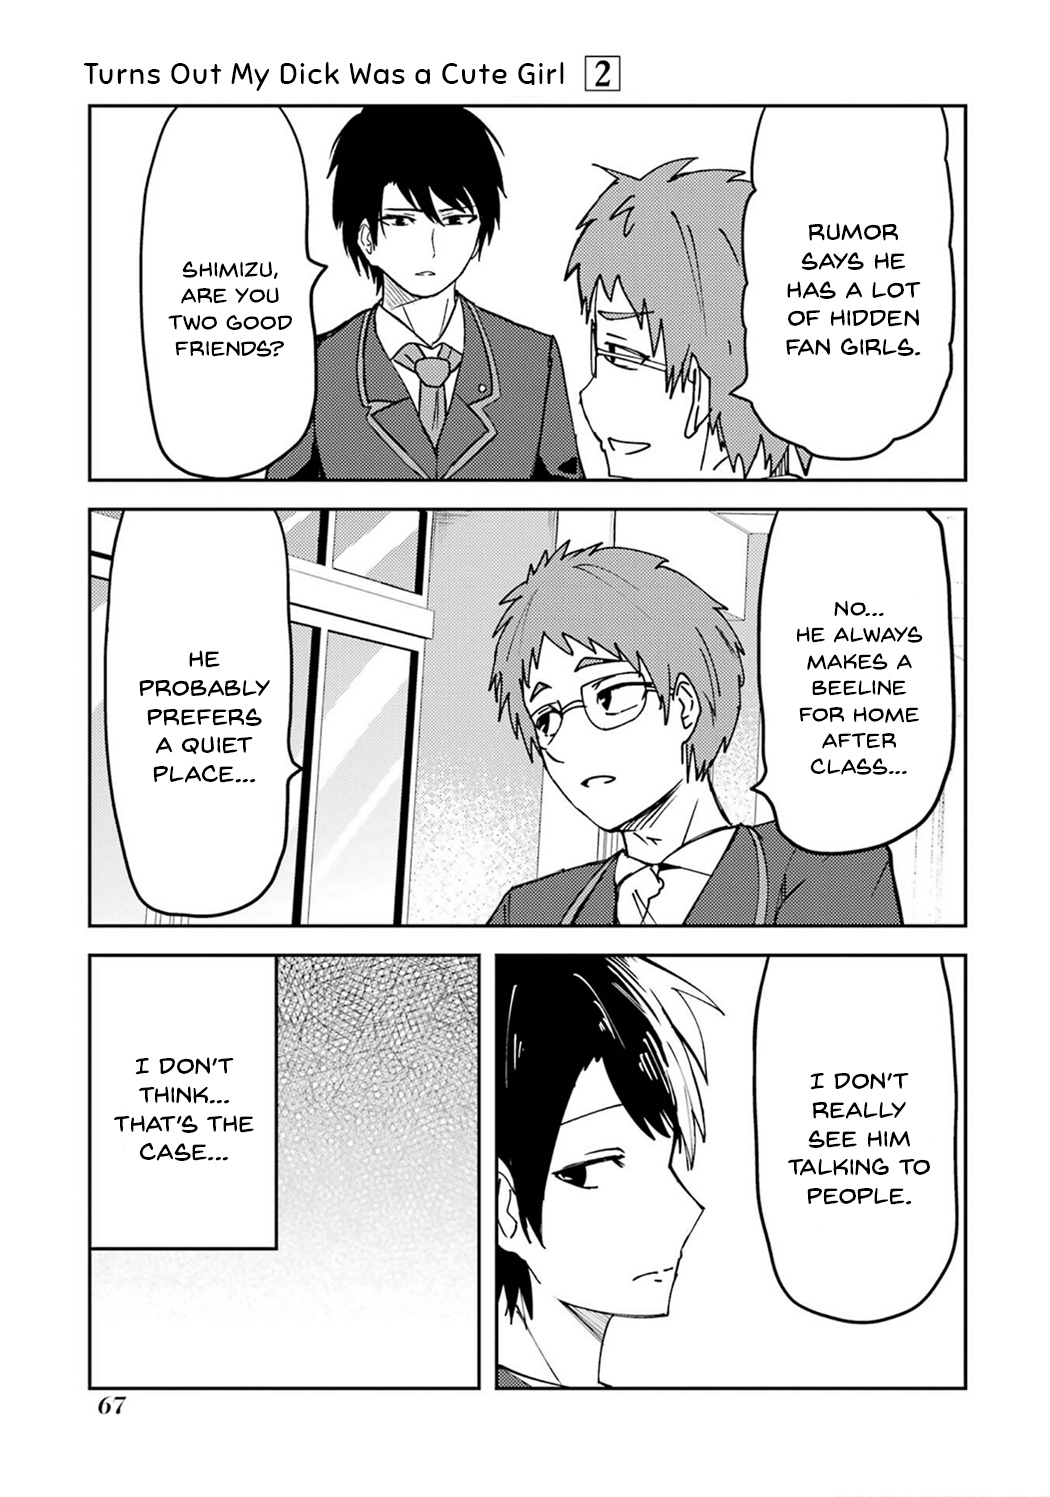 Turns Out My Dick Was A Cute Girl Vol.2 Chapter 20: My Dick And Ichinose-Kun - Picture 3